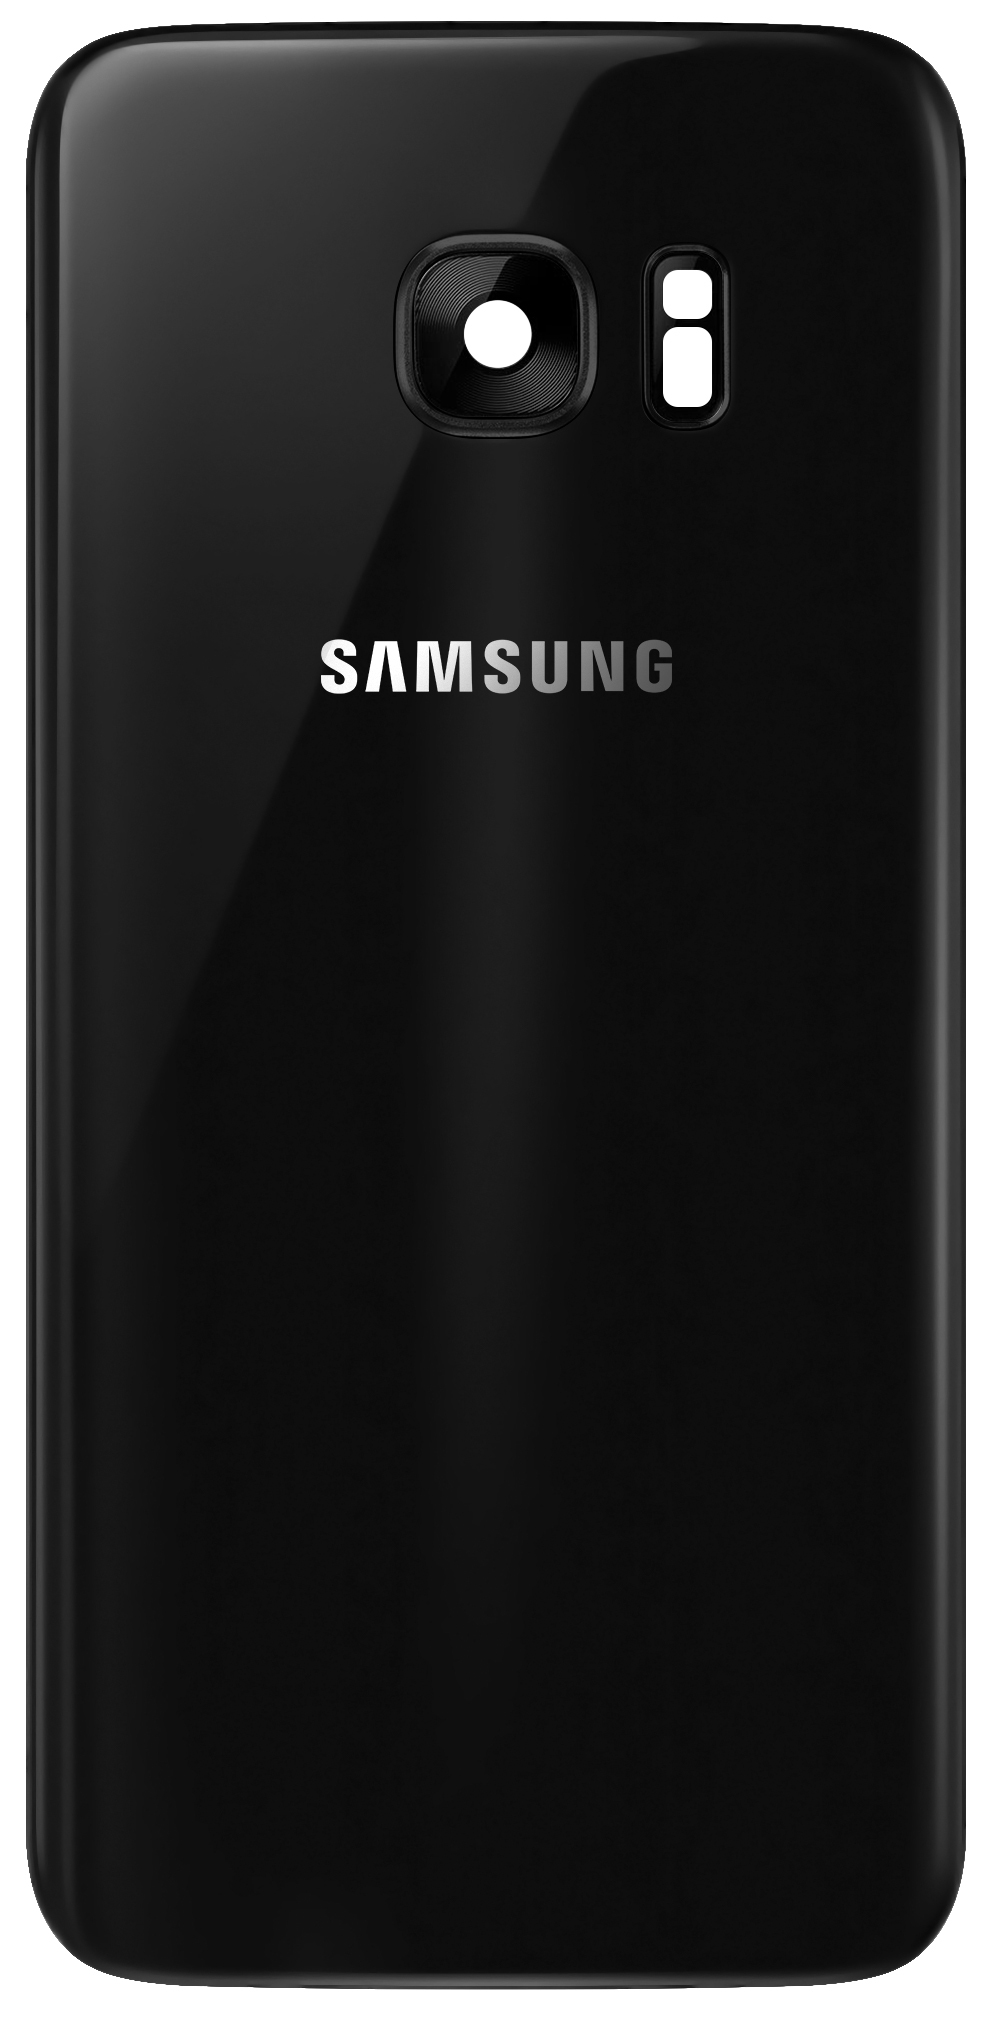 battery-cover-for-samsung-galaxy-s7-edge-g935-2C-black-